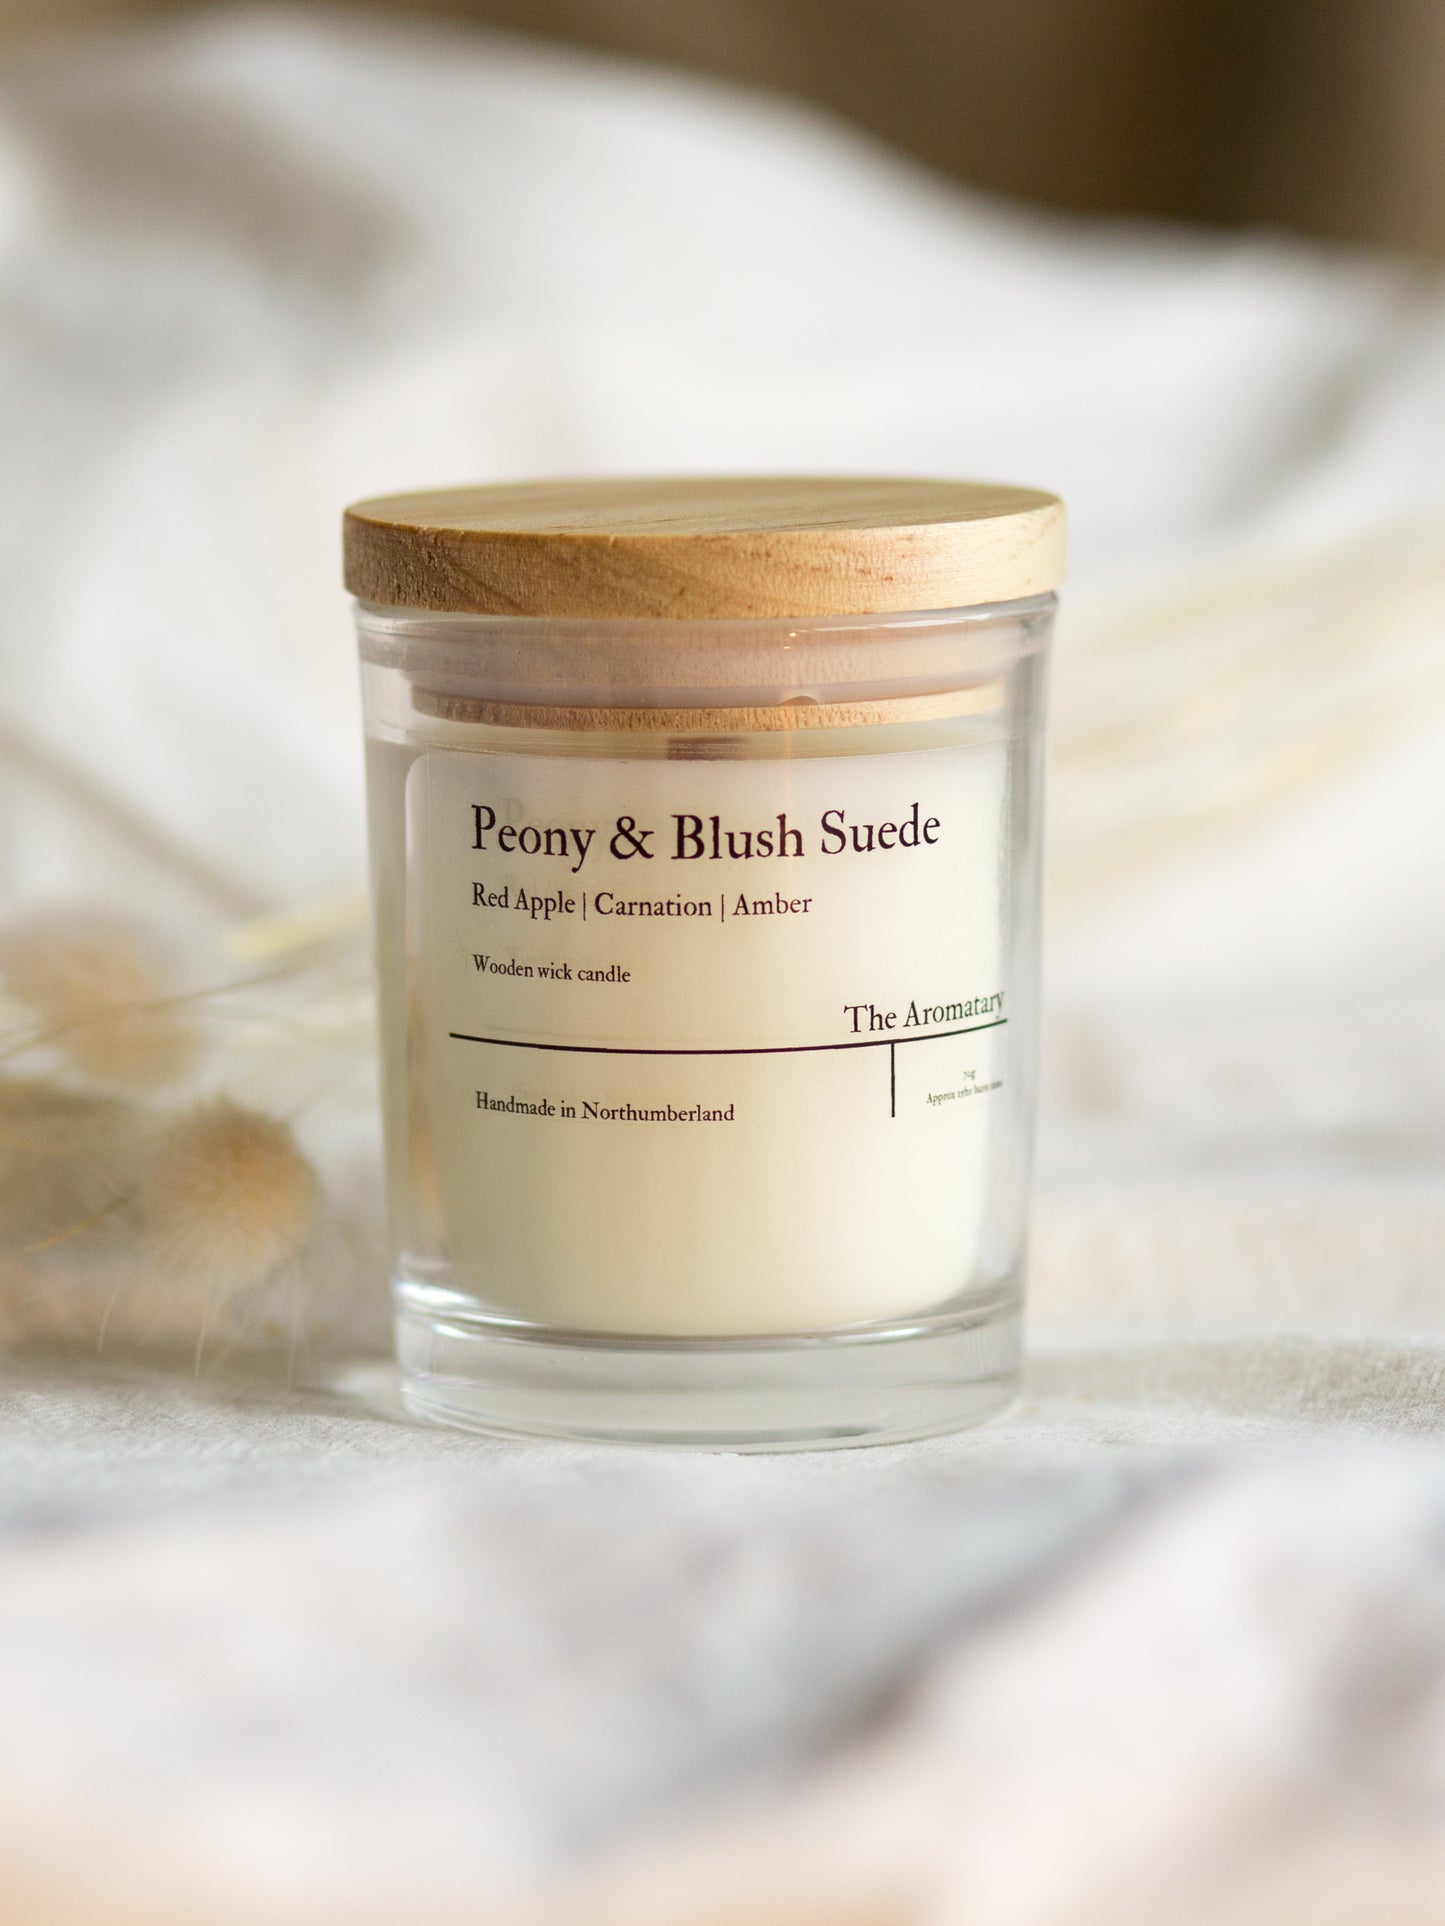 Peony & Blush Suede wooden wick votive